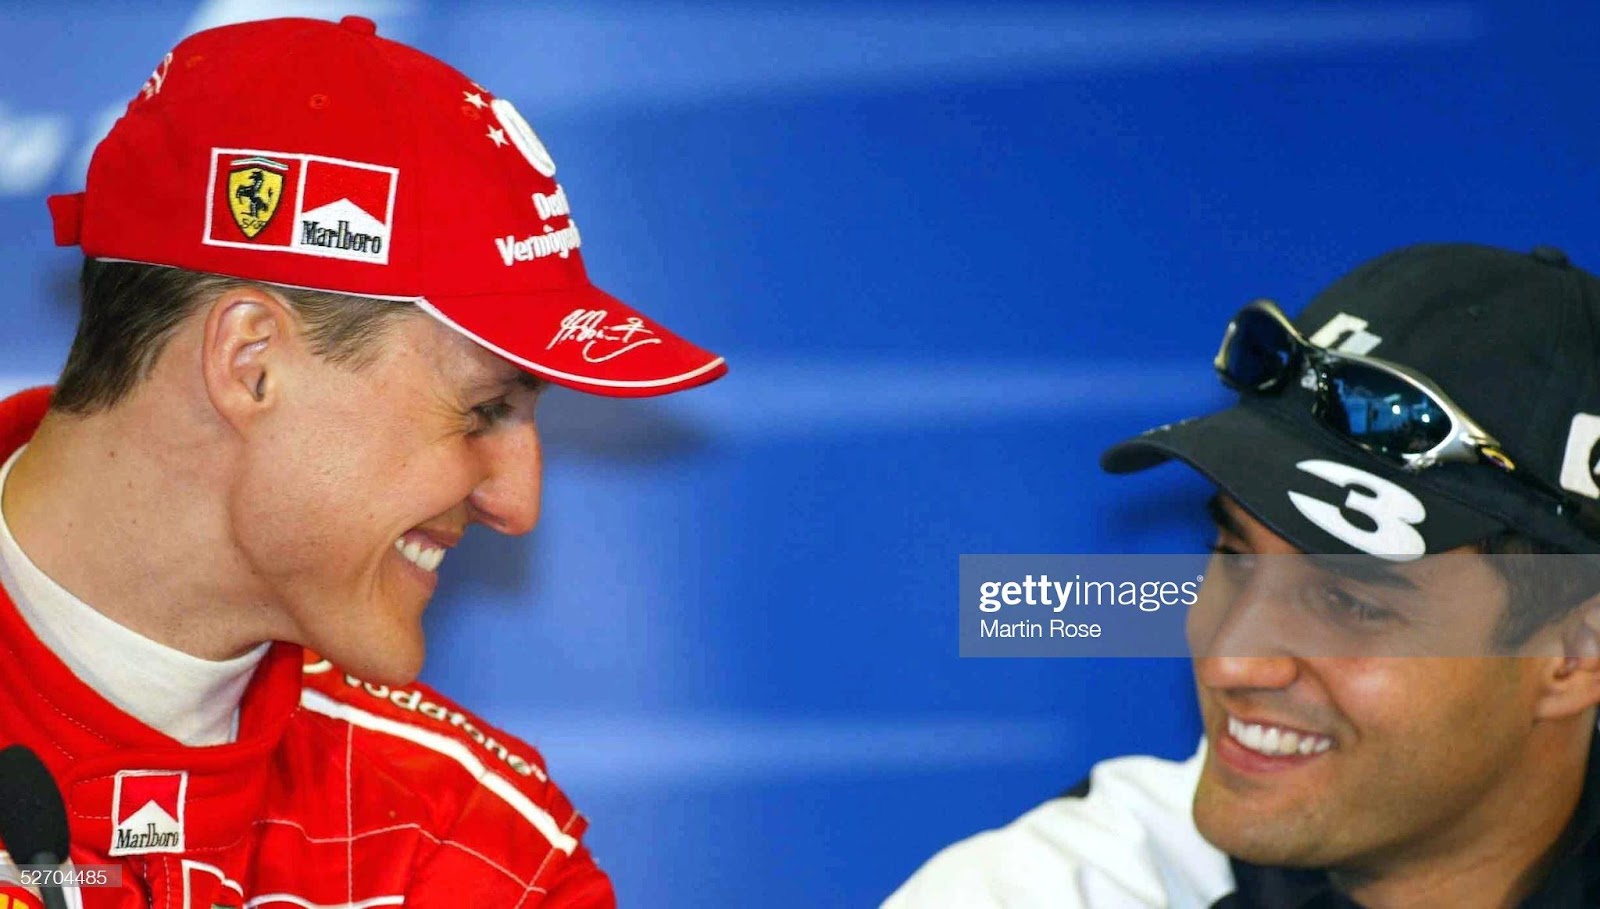 Michael Schumacher and Juan Pablo Montoya at the 2003 Australian Grand Prix in Melbourne on March 08, 2003.